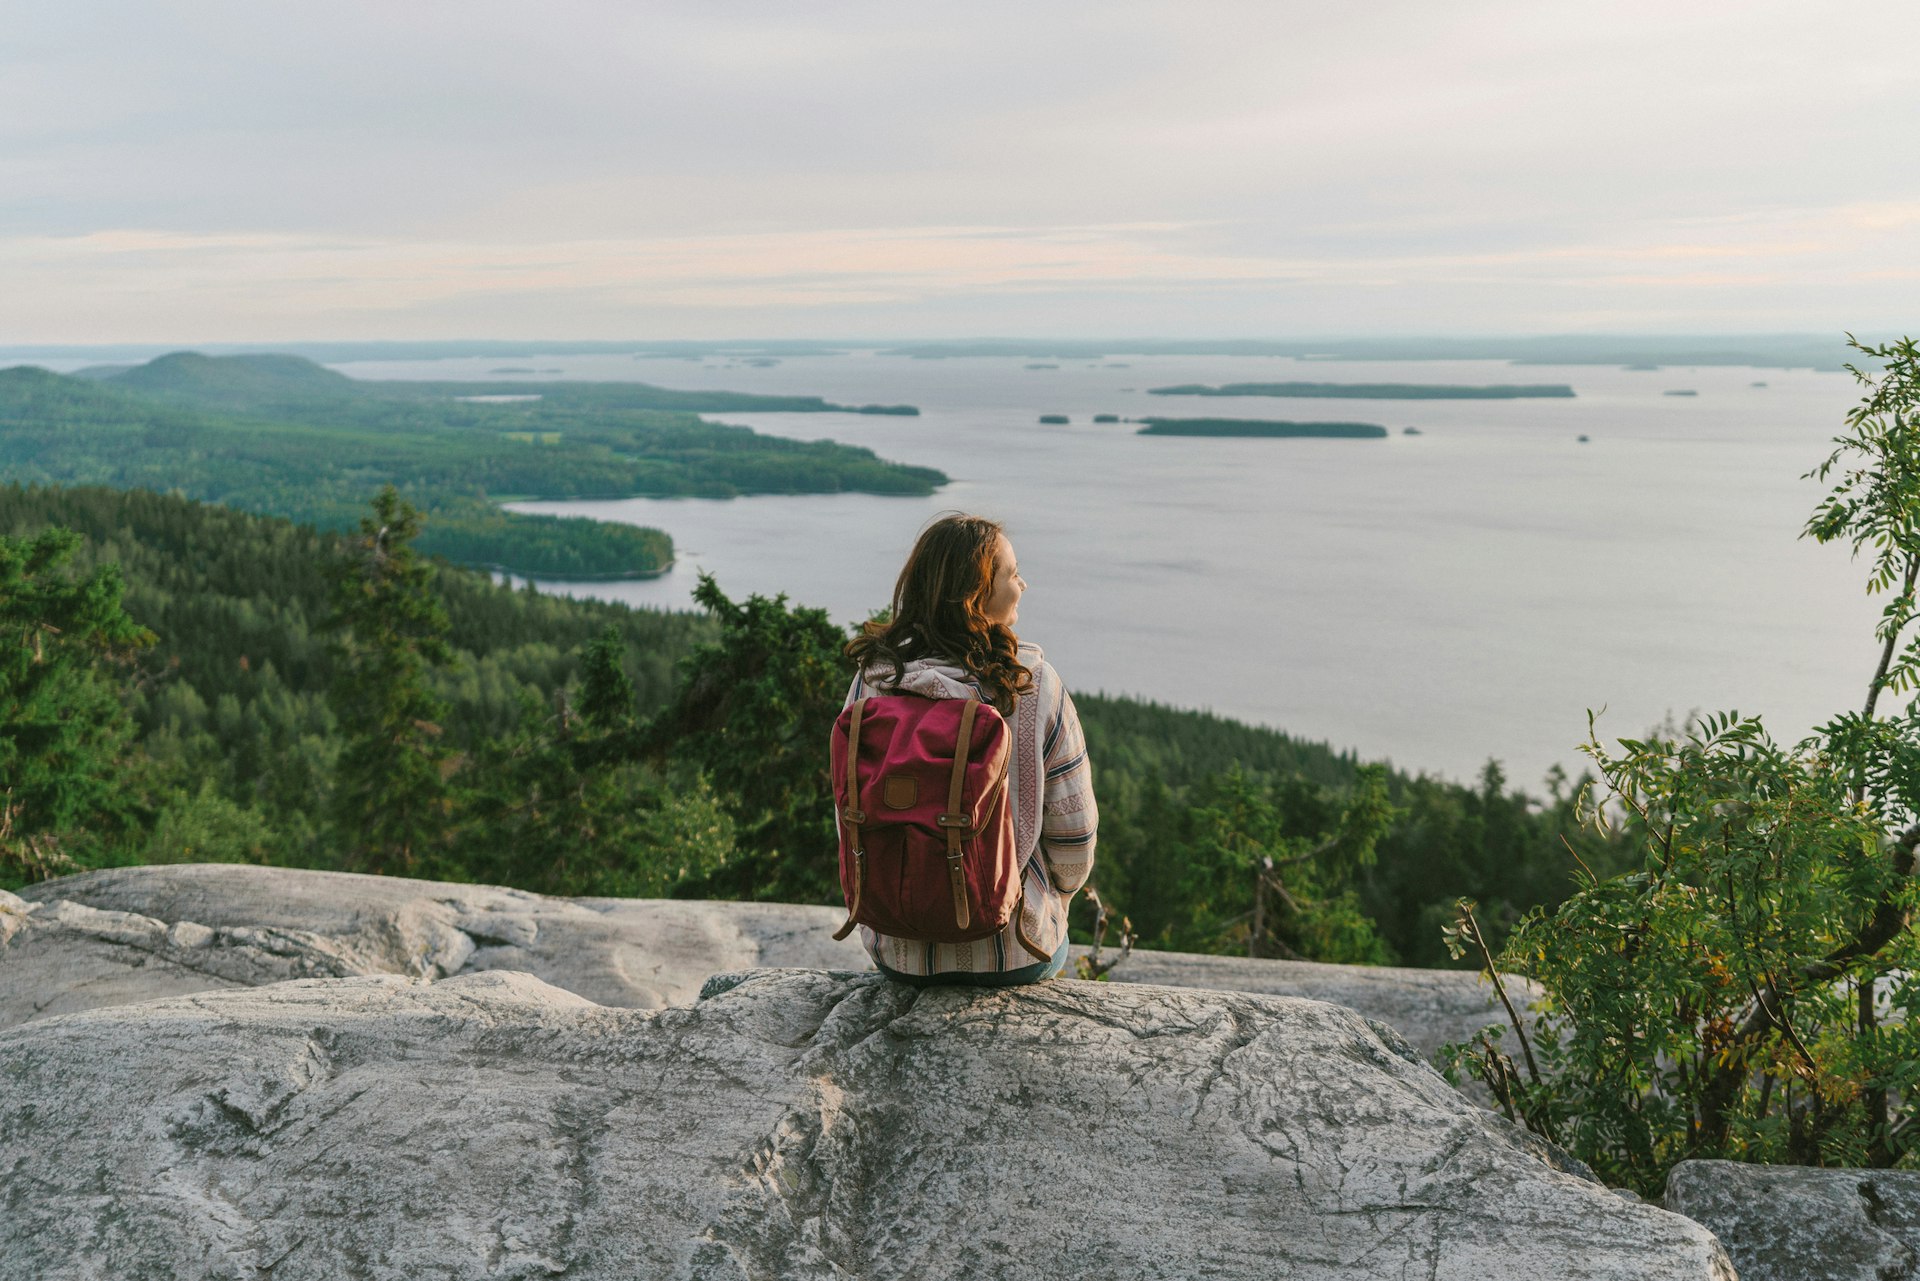 A woman sits on a cliff at the edge of a lake looking out towards forested islets that dot the landscape